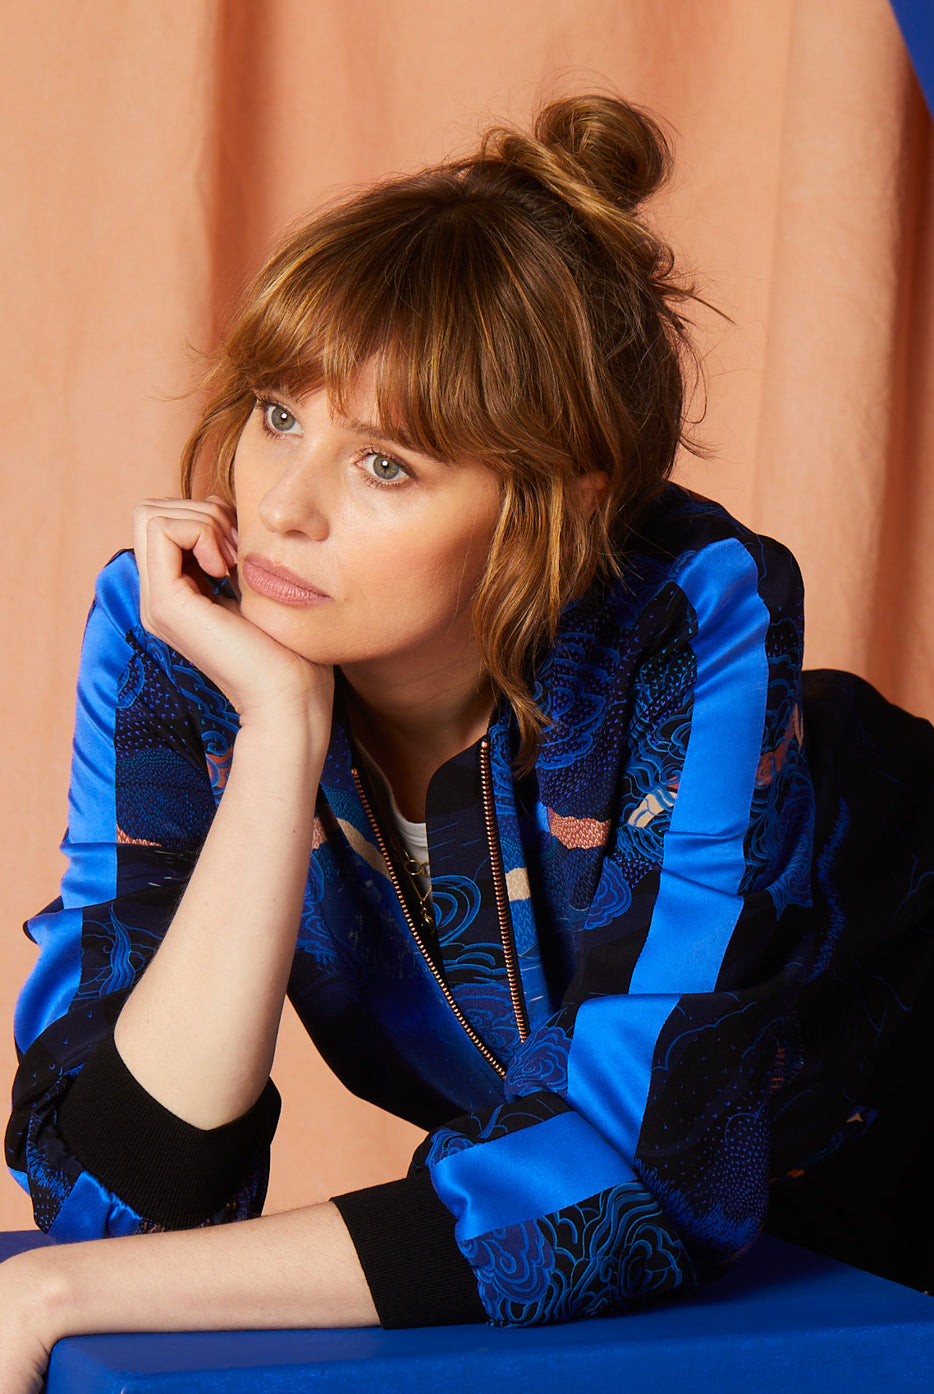 A women wearing a Silk Bomber jacket with Japanese landscapes in blues and pinks